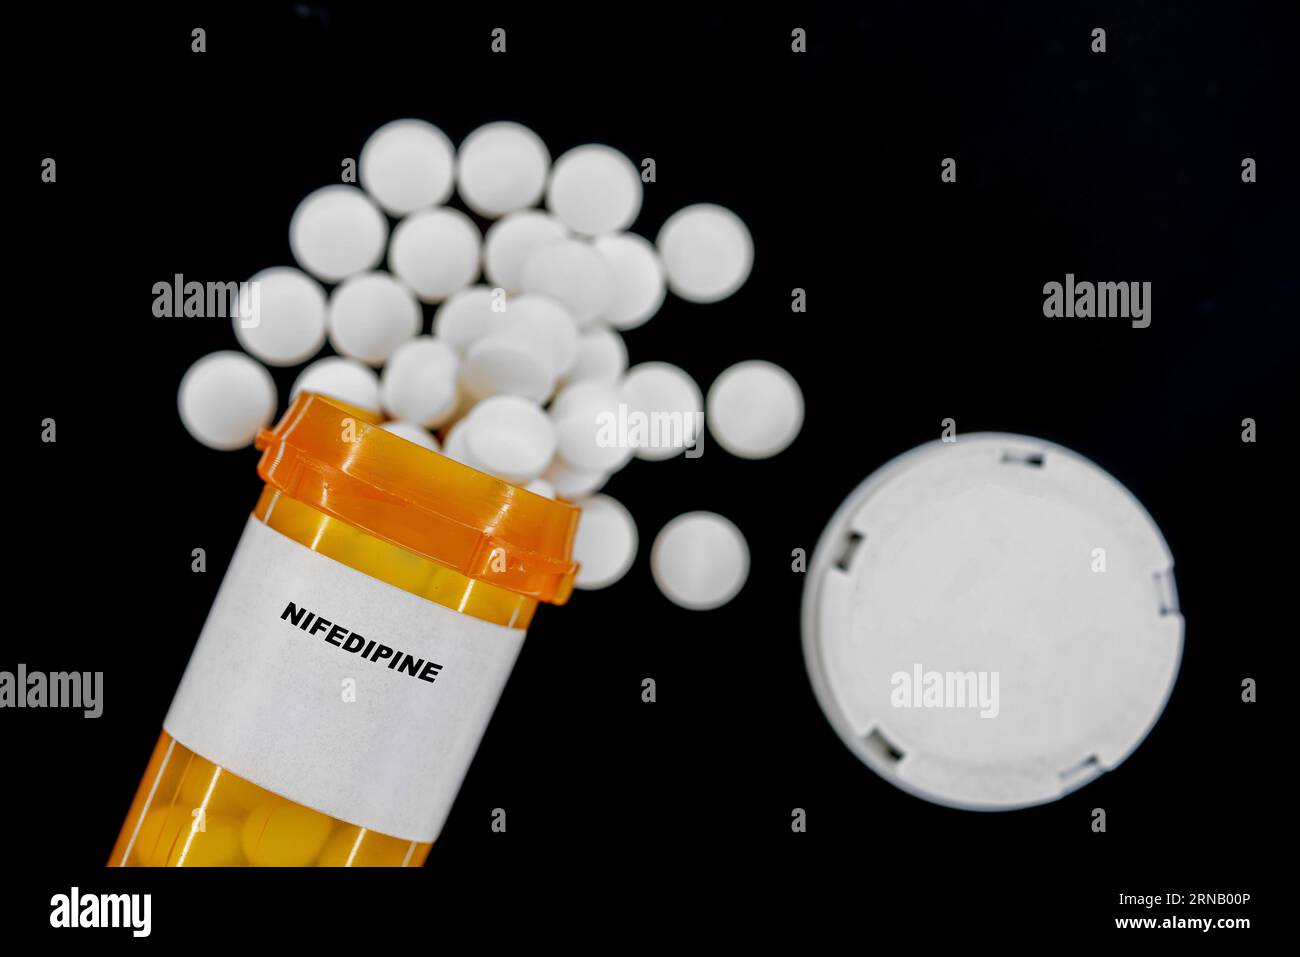 Nifedipine Rx medical pills in plactic Bottle with tablets. Pills spilling out from yellow container. Stock Photo